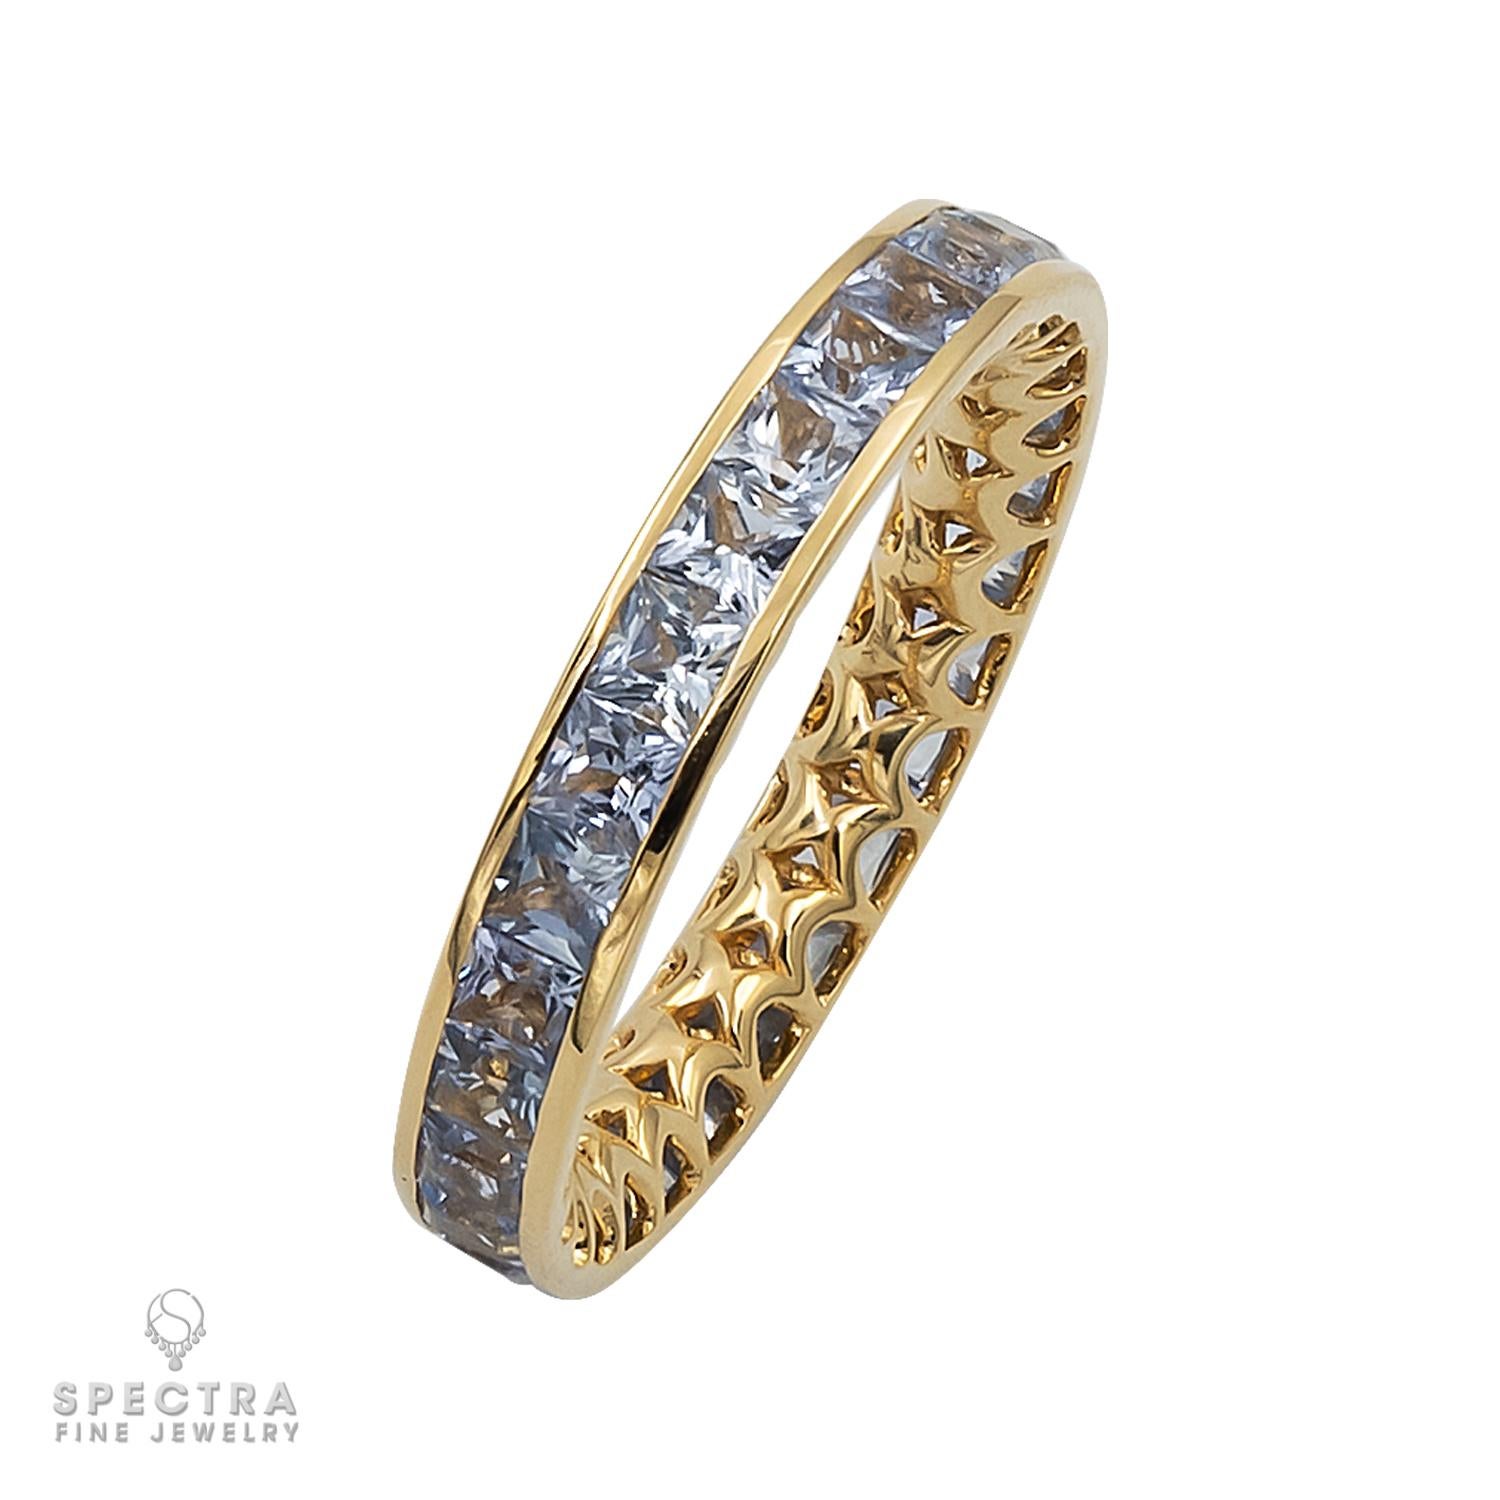 2.75-carat Ceylon Heated Blue Sapphire Yellow Gold Eternity Band, a true gem from Spectra Fine Jewelry. Crafted with meticulous artistry, this band features a stunning Ceylon Heated Blue Sapphire, known for its captivating hue. Set in 18k yellow